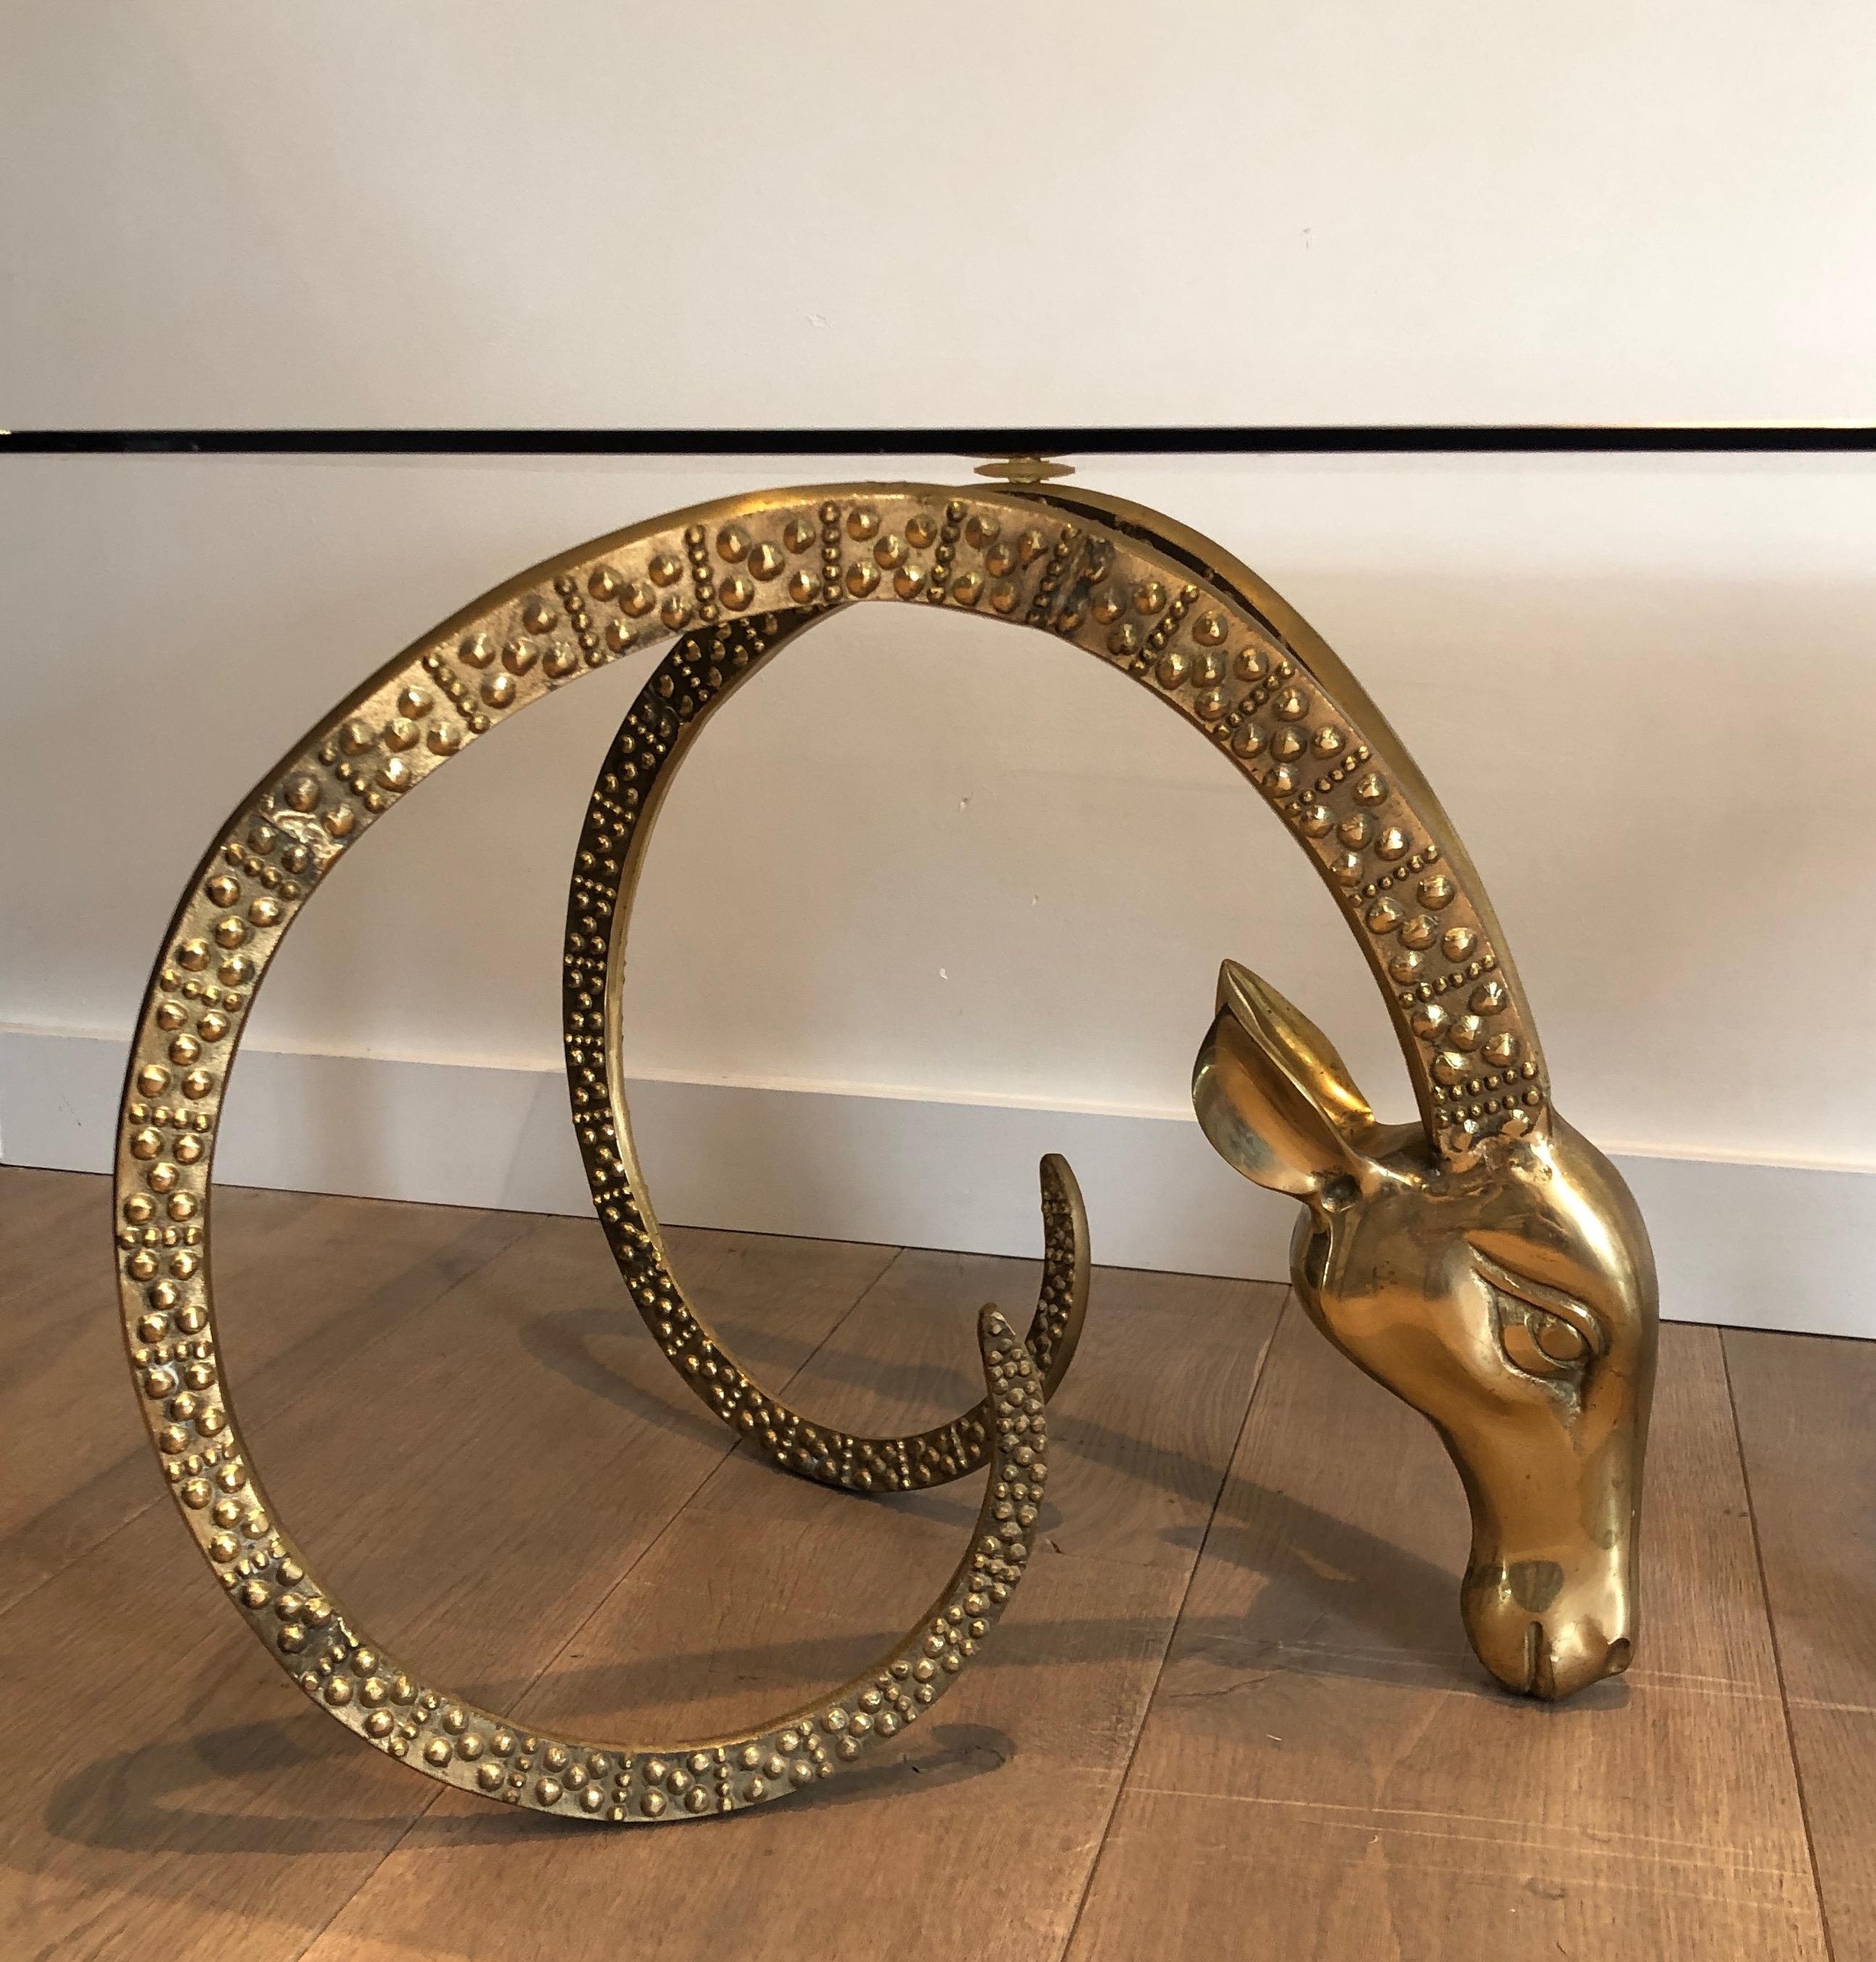 Late 20th Century Bronze Coffee Table Representing 2 Ibex Heads, French Work by Alain Chervet, Cir